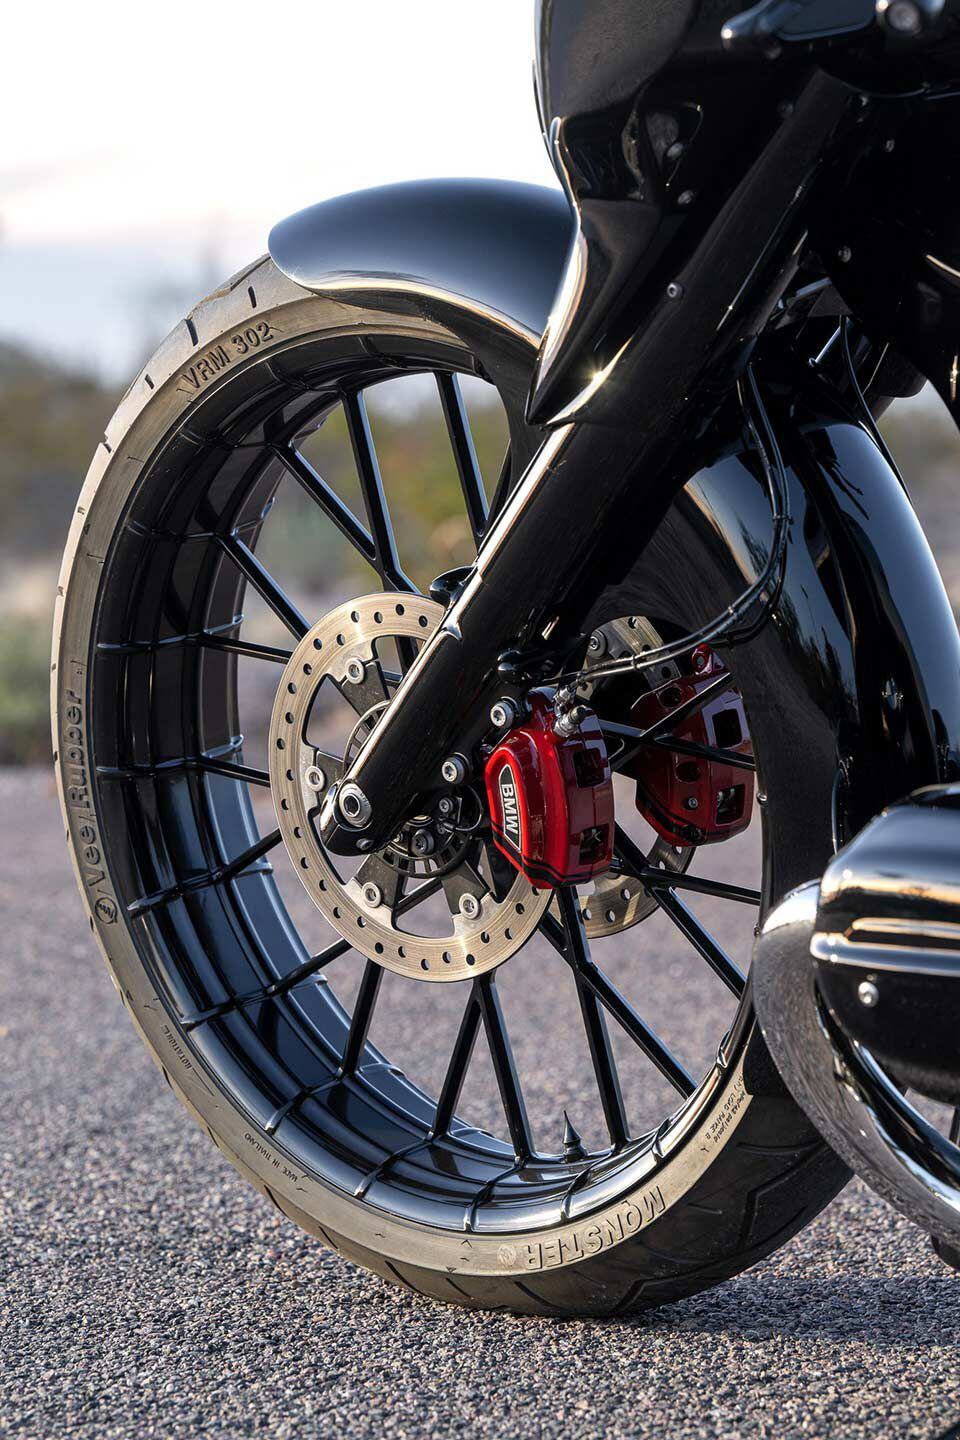 The new 26-inch front wheel cut from a 400-pound block of solid aluminum is covered by a 180mm-wide front tire. The frame had to be stretched and raked to accommodate it.